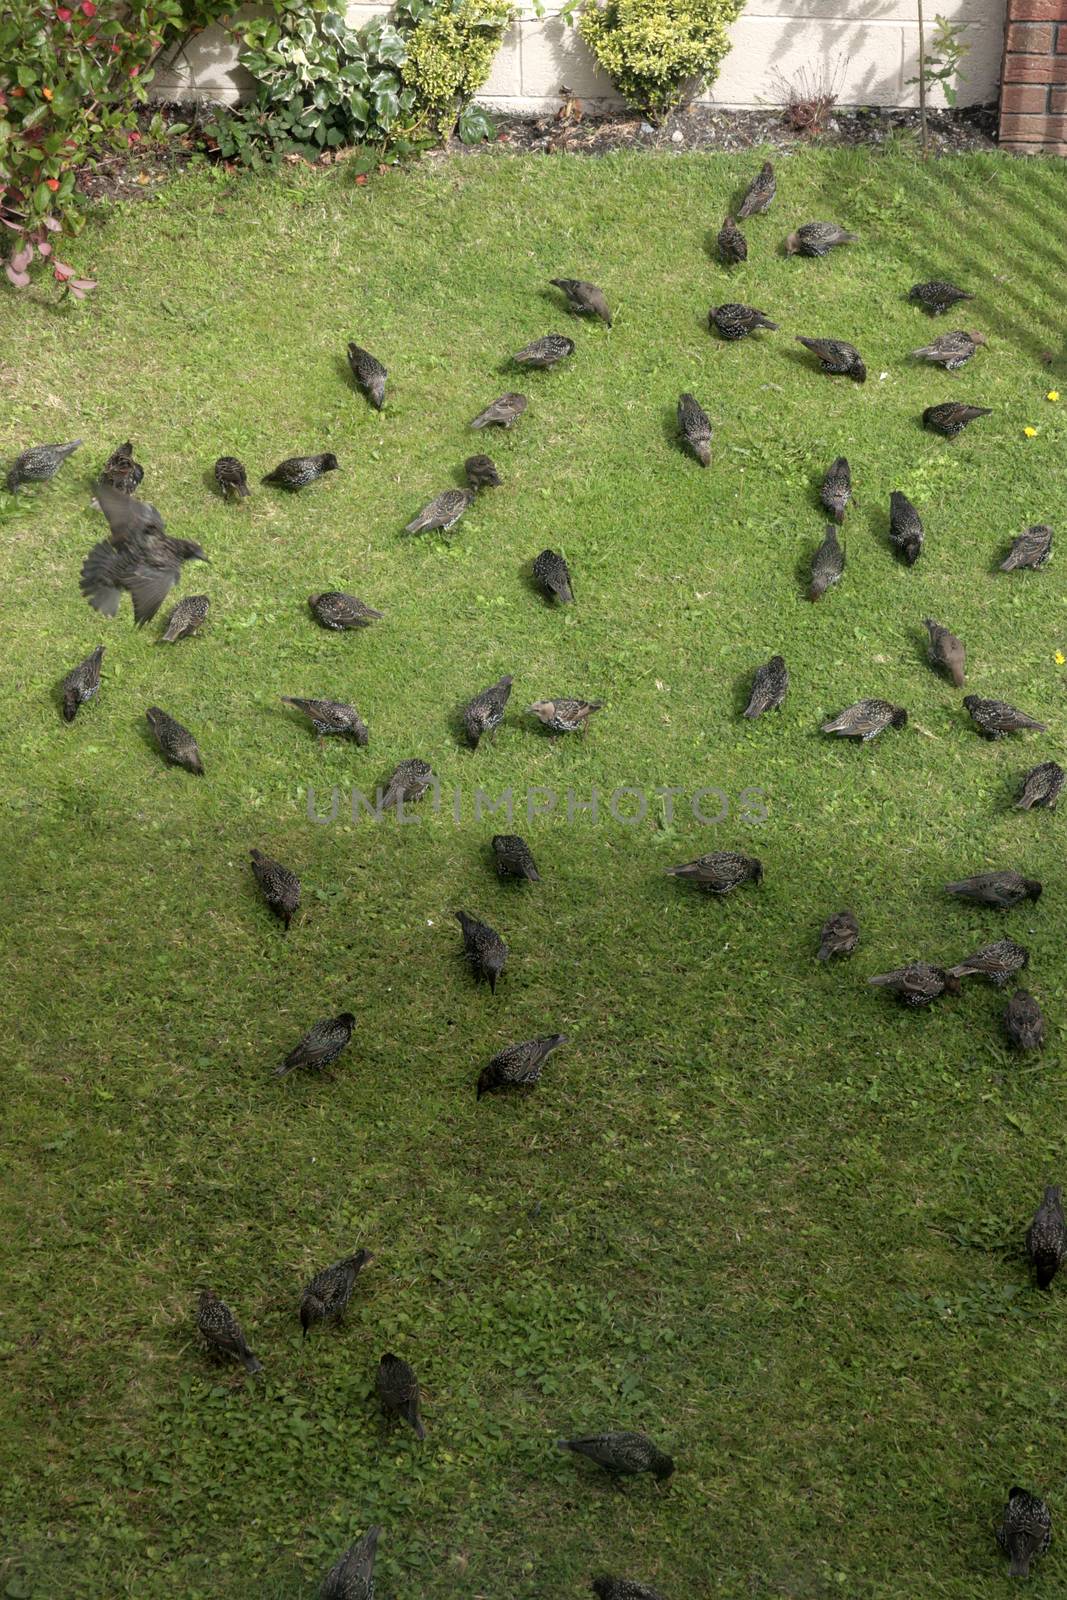 starlings looking for worms by morrbyte